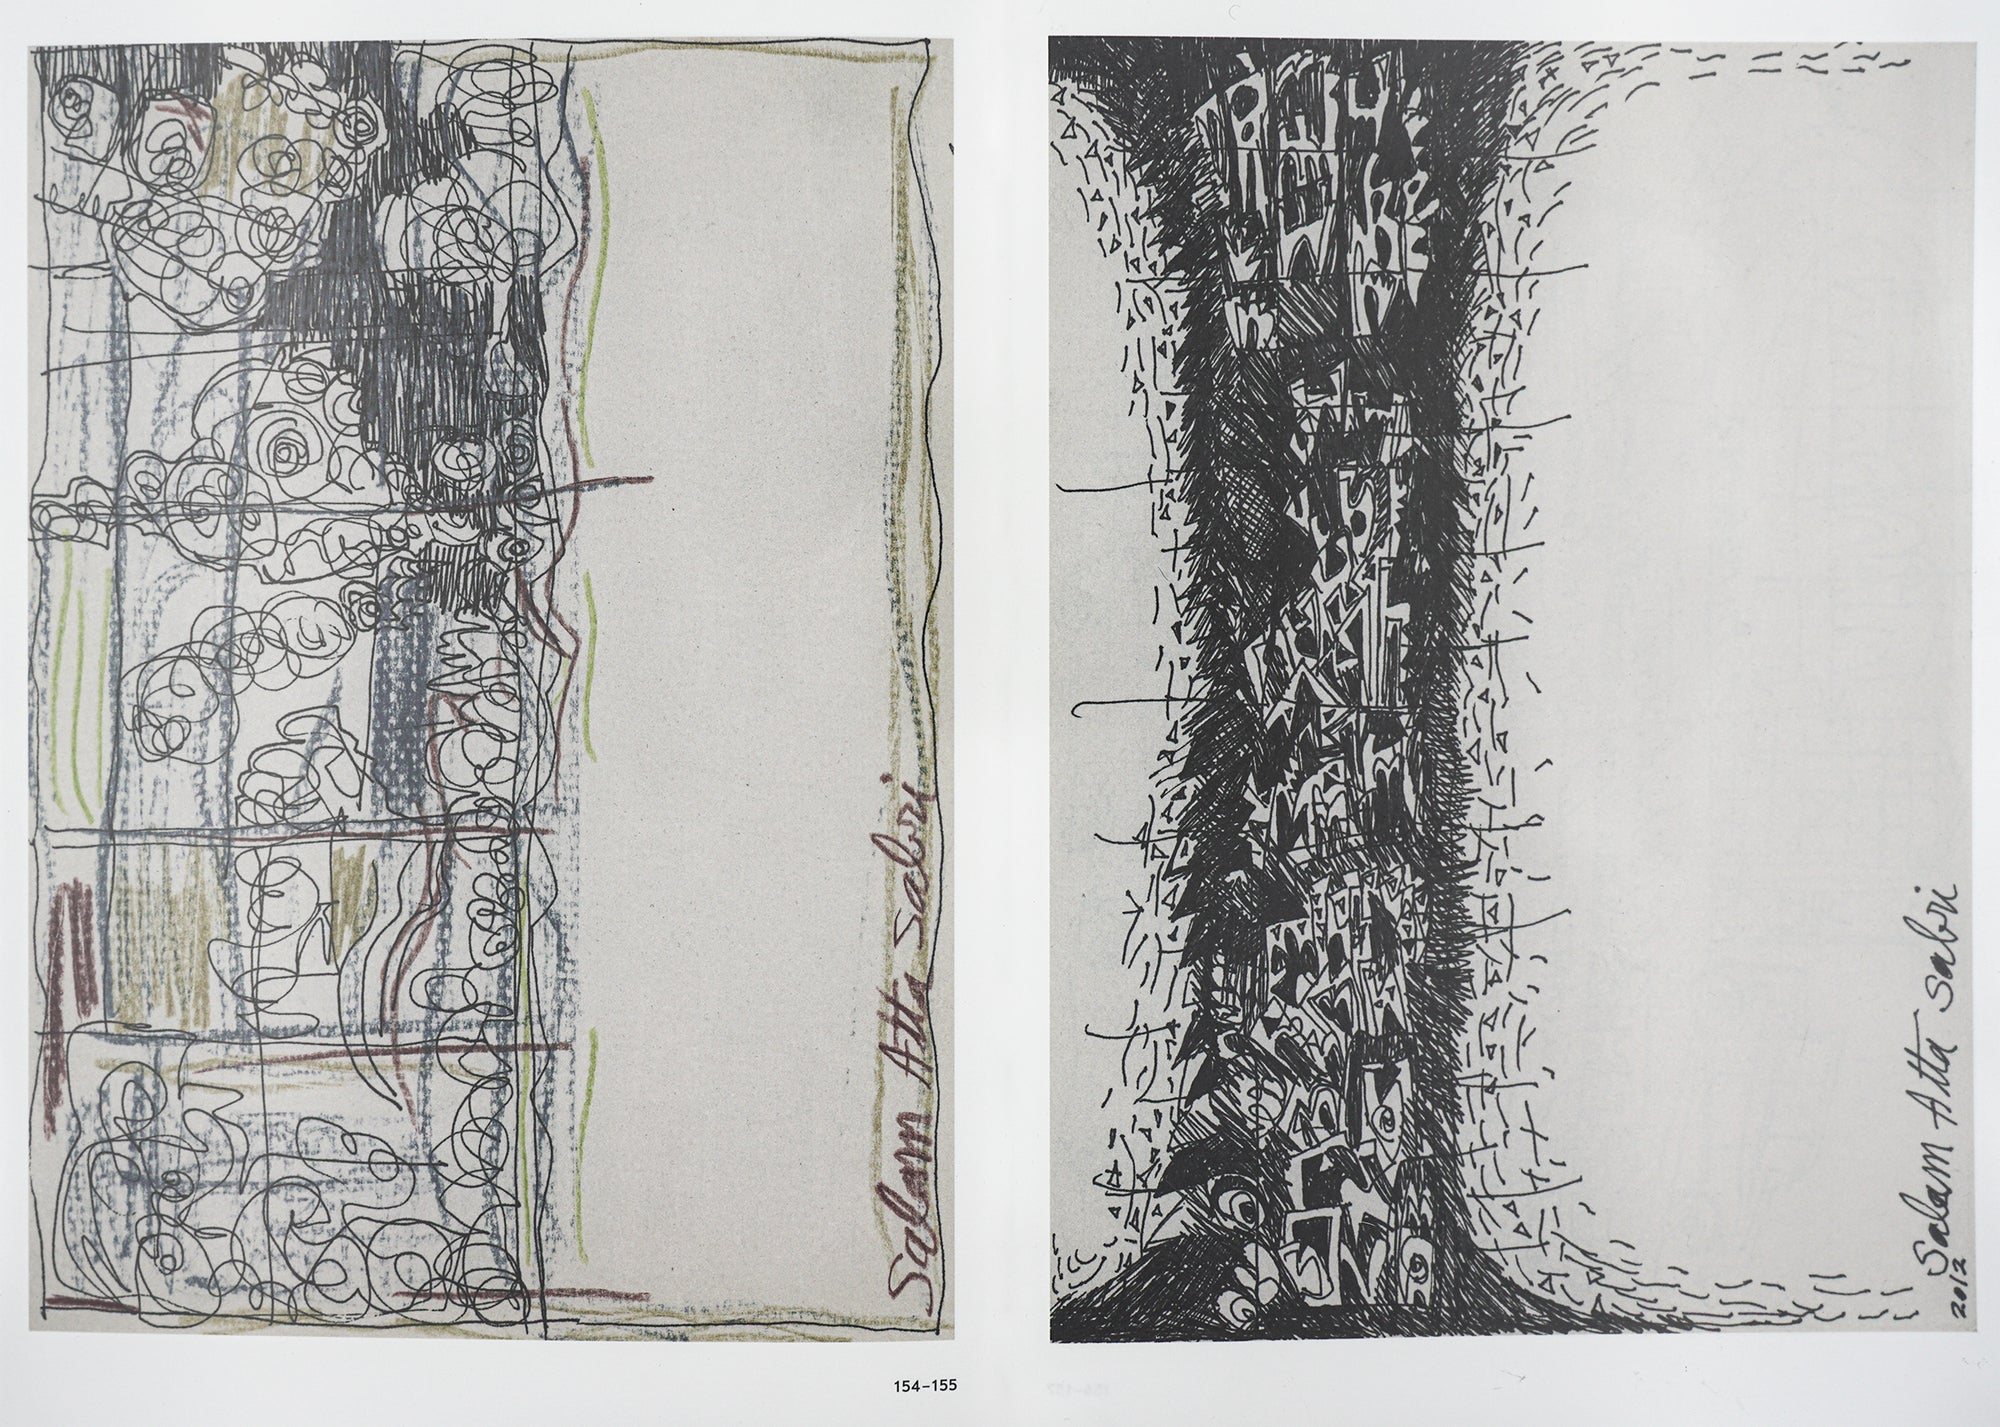 Spread of two abstract, black and white pen & ink drawings, which are tonal and scribbley.